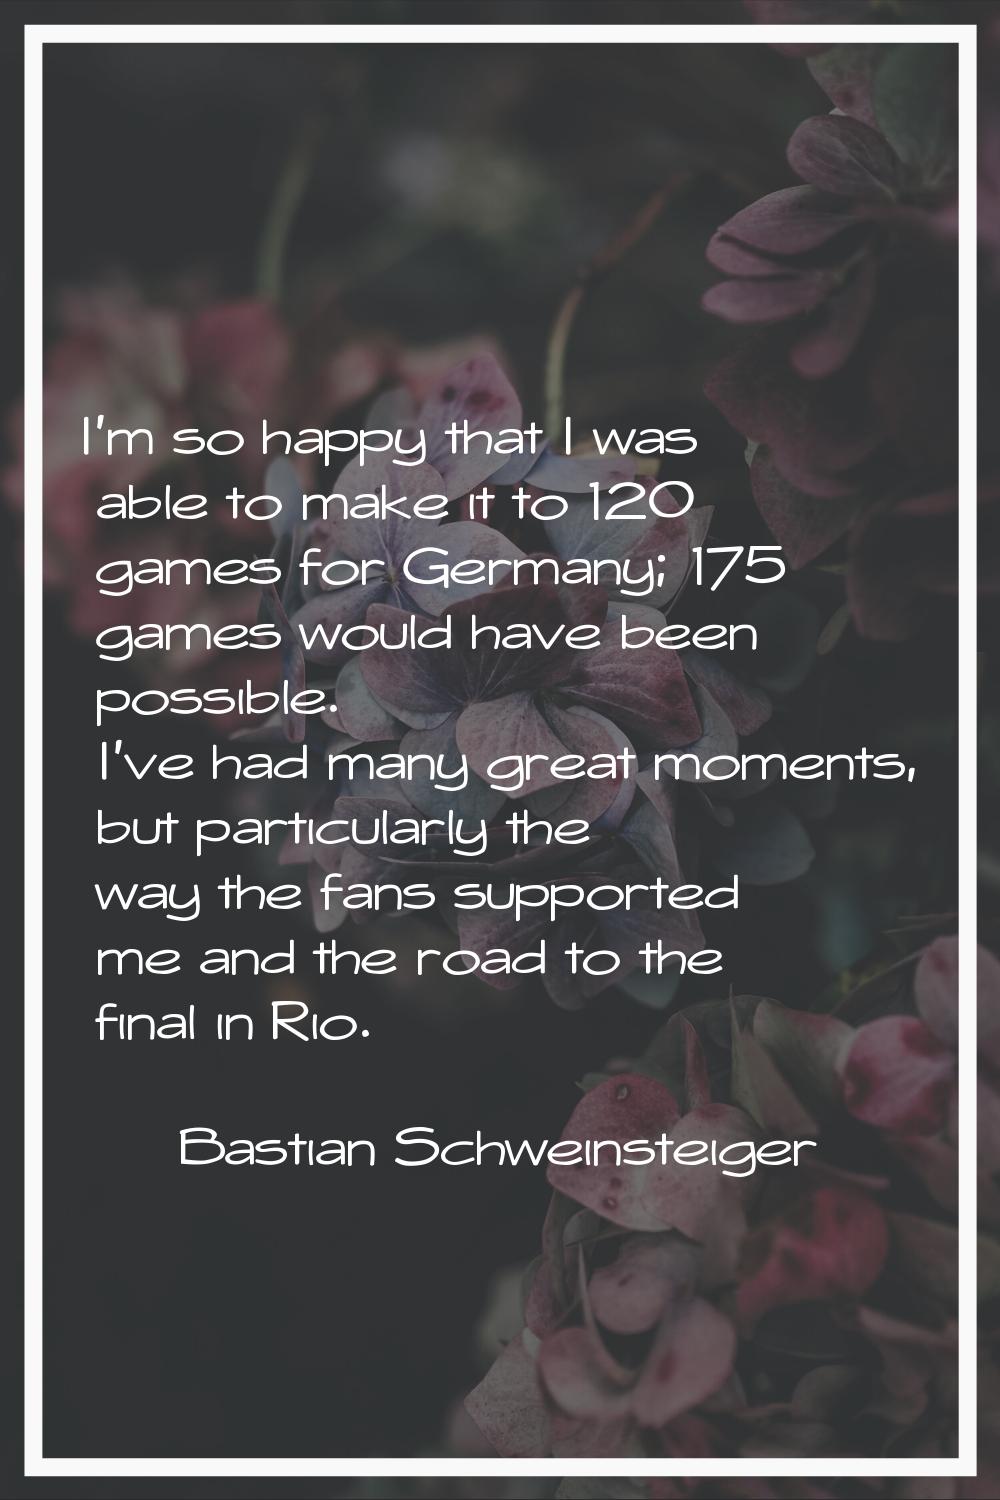 I'm so happy that I was able to make it to 120 games for Germany; 175 games would have been possibl